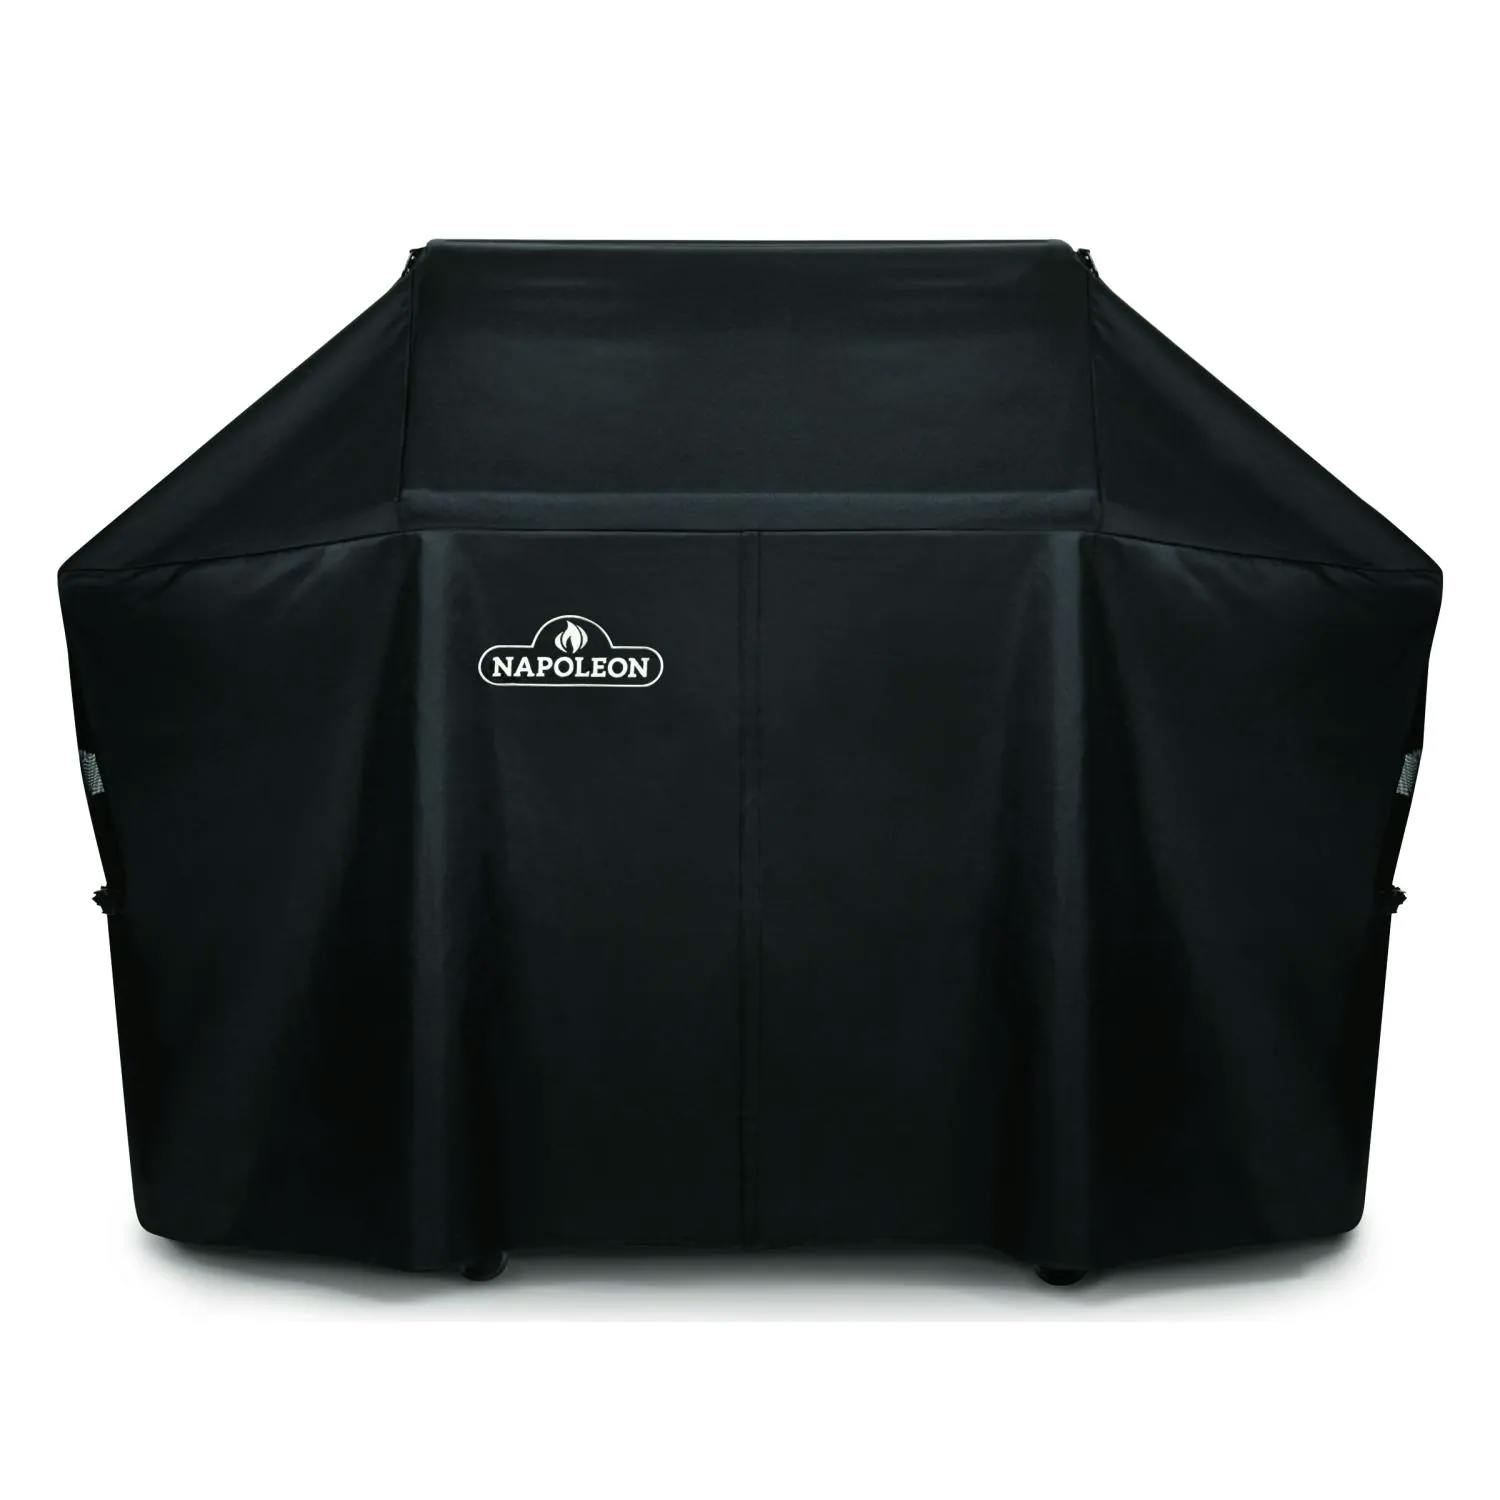 Napoleon Grill Cover for Pro 500 & Prestige 500 Series Freestanding Gas Grills · 68 in.